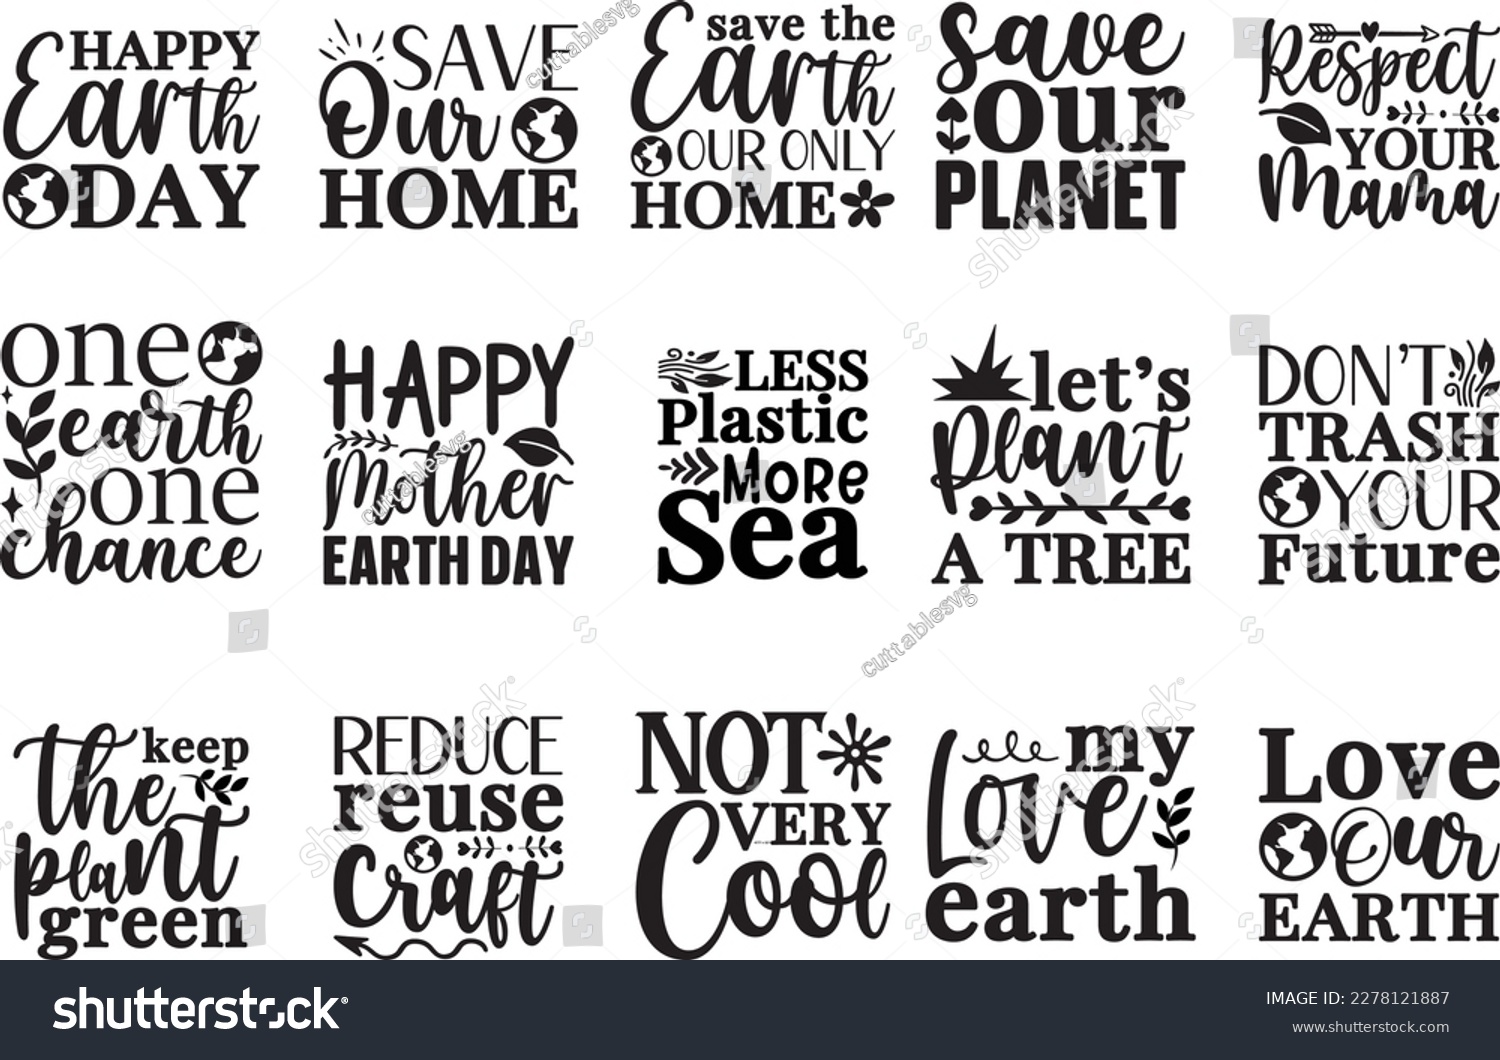 SVG of Happy Earth Day, Earth Day, Earth Day svg, Celebration svg, April 22, Typography, Earth Day Quotes, Global, T-shirt Design, SVG, EPS svg